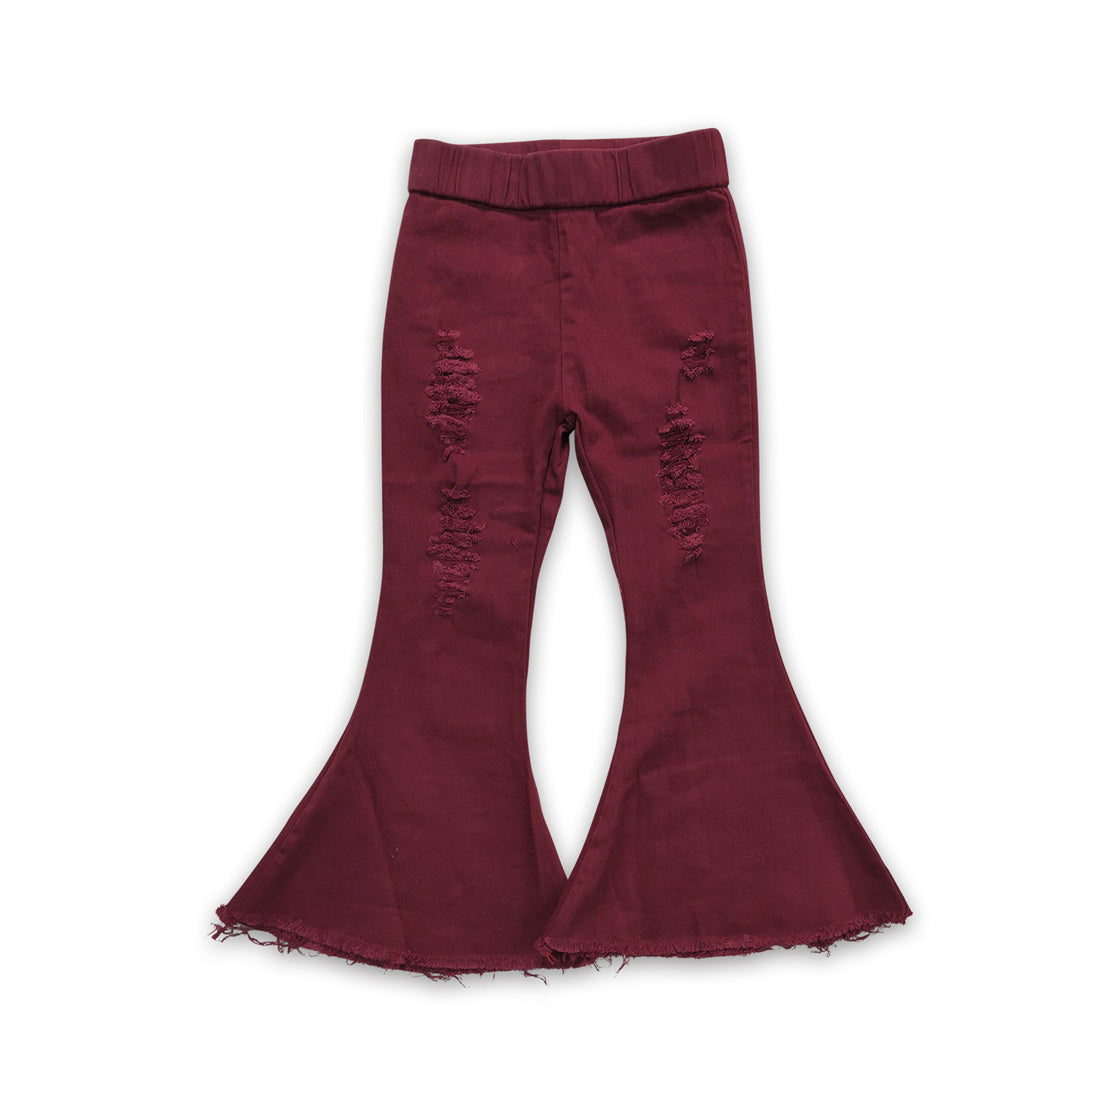 P0047 baby girl clothes dark red jeans bell bottom pant